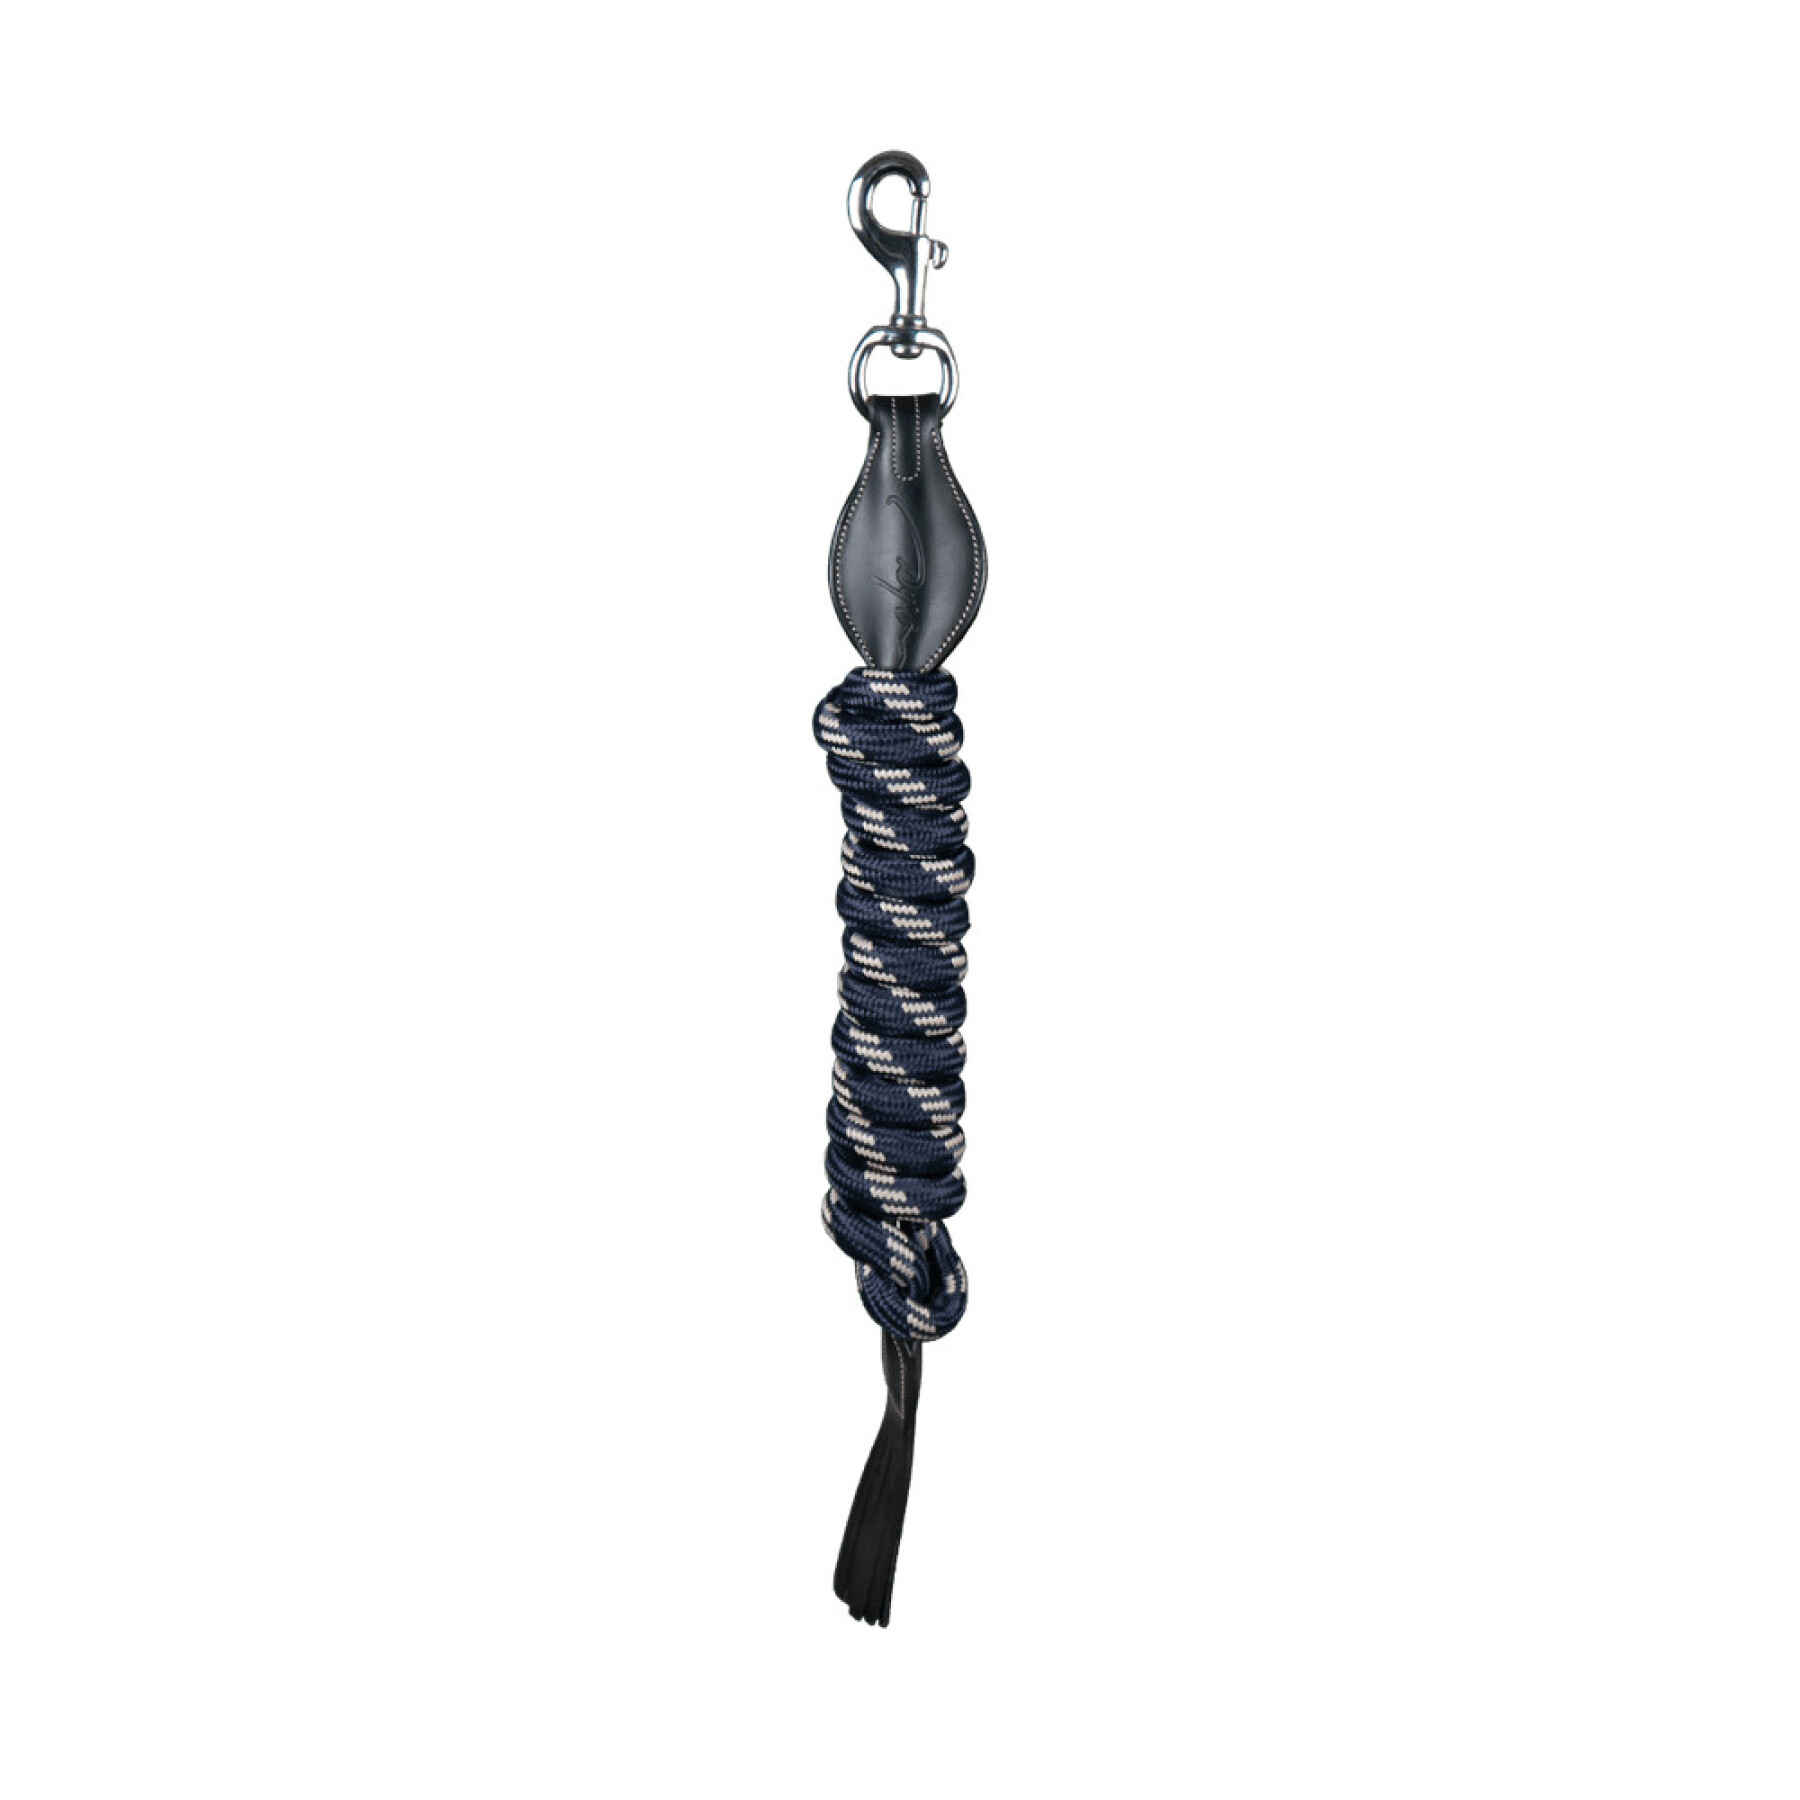 Rope riding lanyard Dy’on